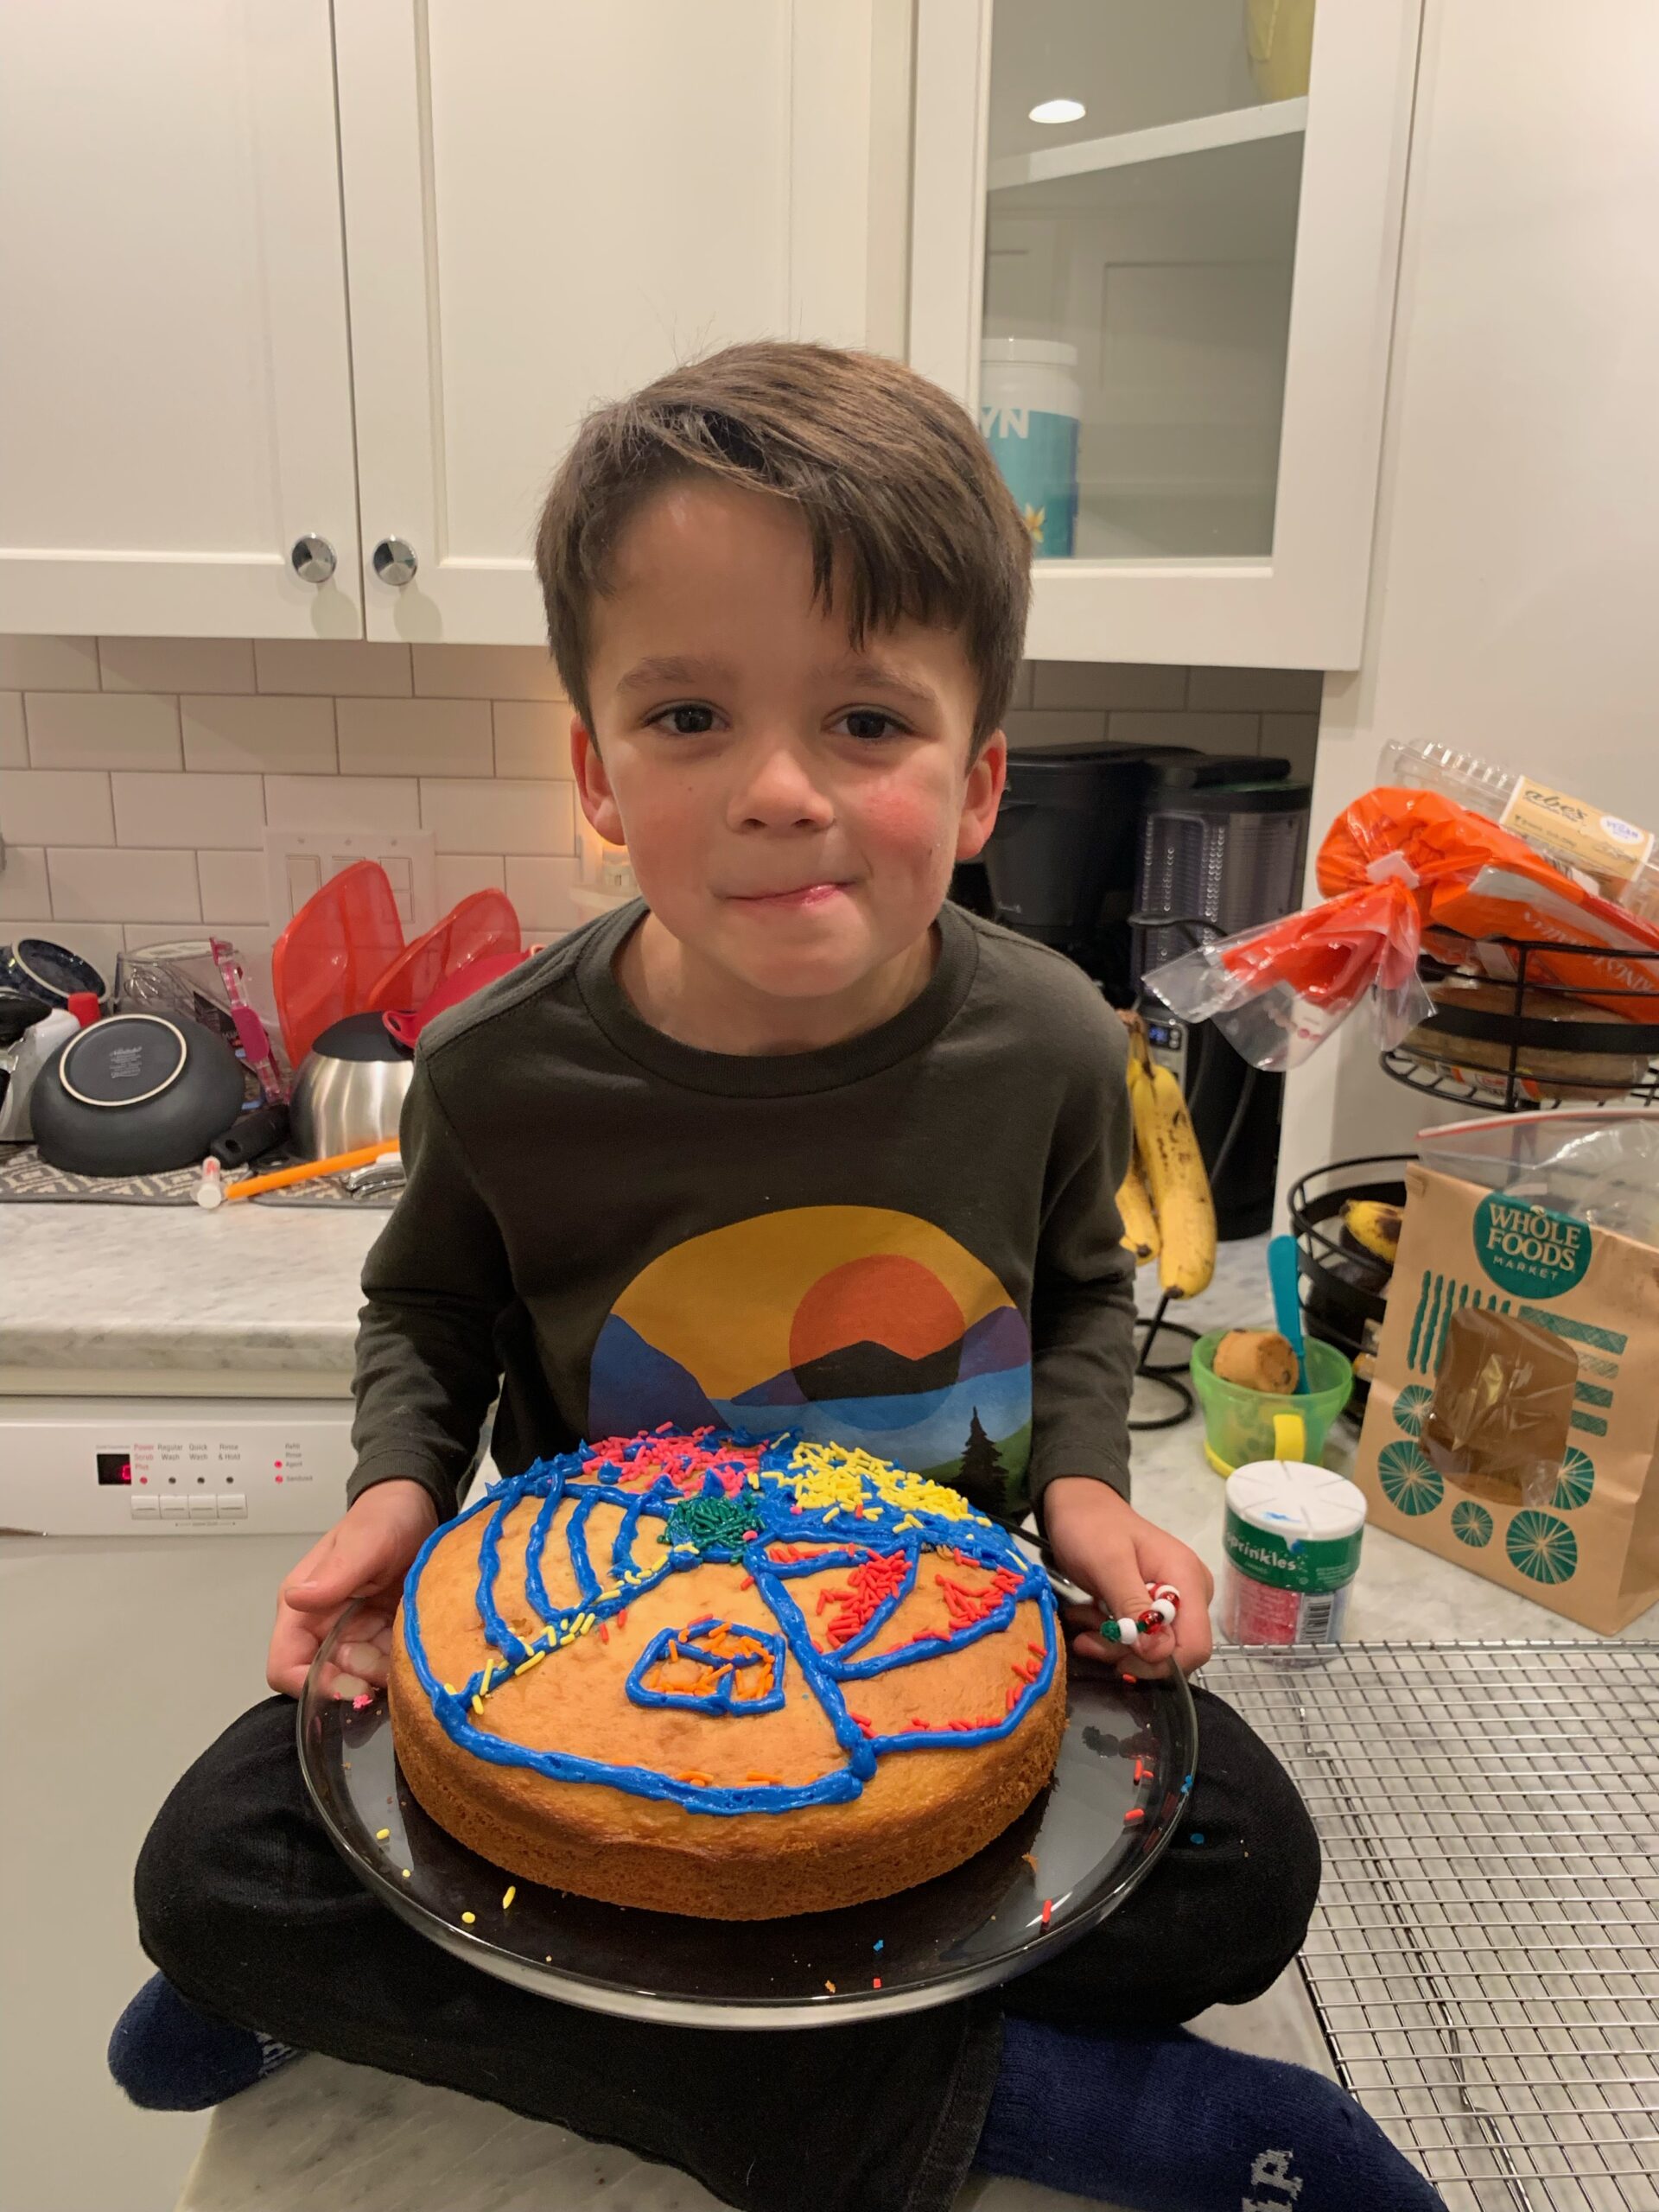 Photo of Tim's son with self-decorated cake